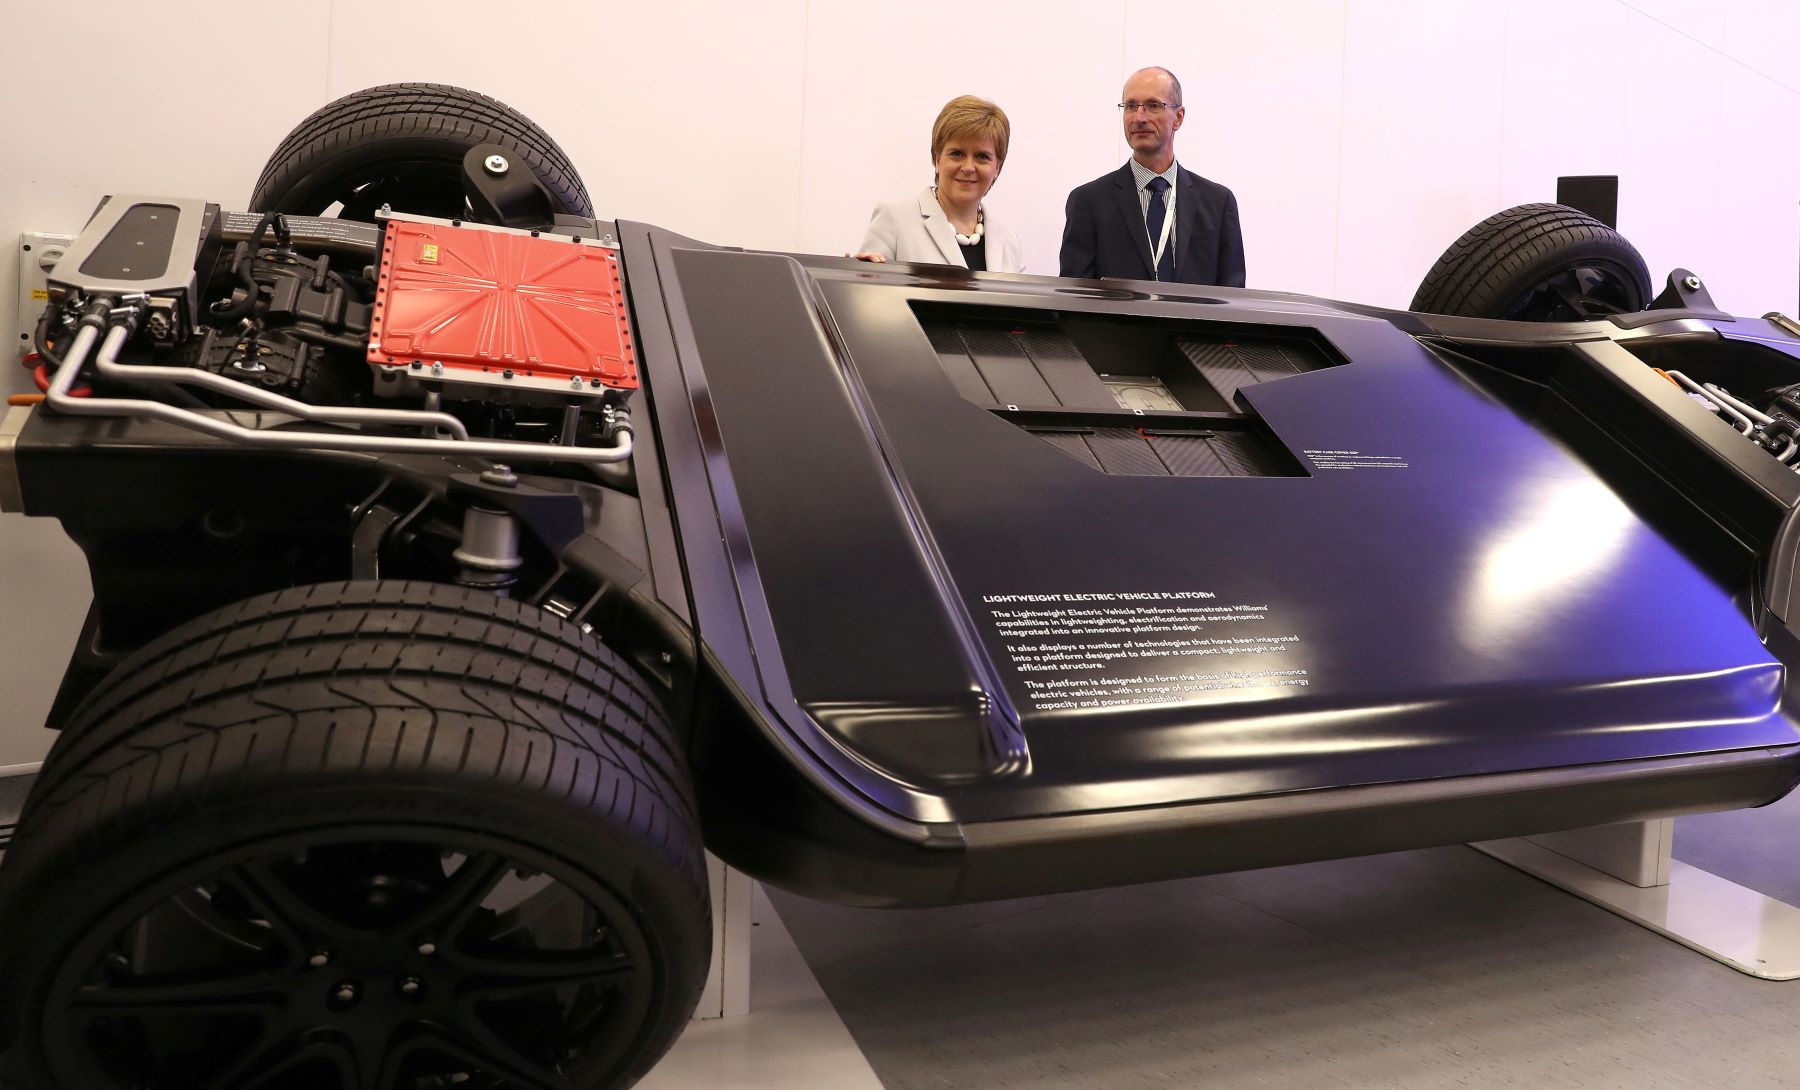 Scotland's First Minister Nicola Sturgeon looking at electric vehicle platform from Williams Advanced Engineering